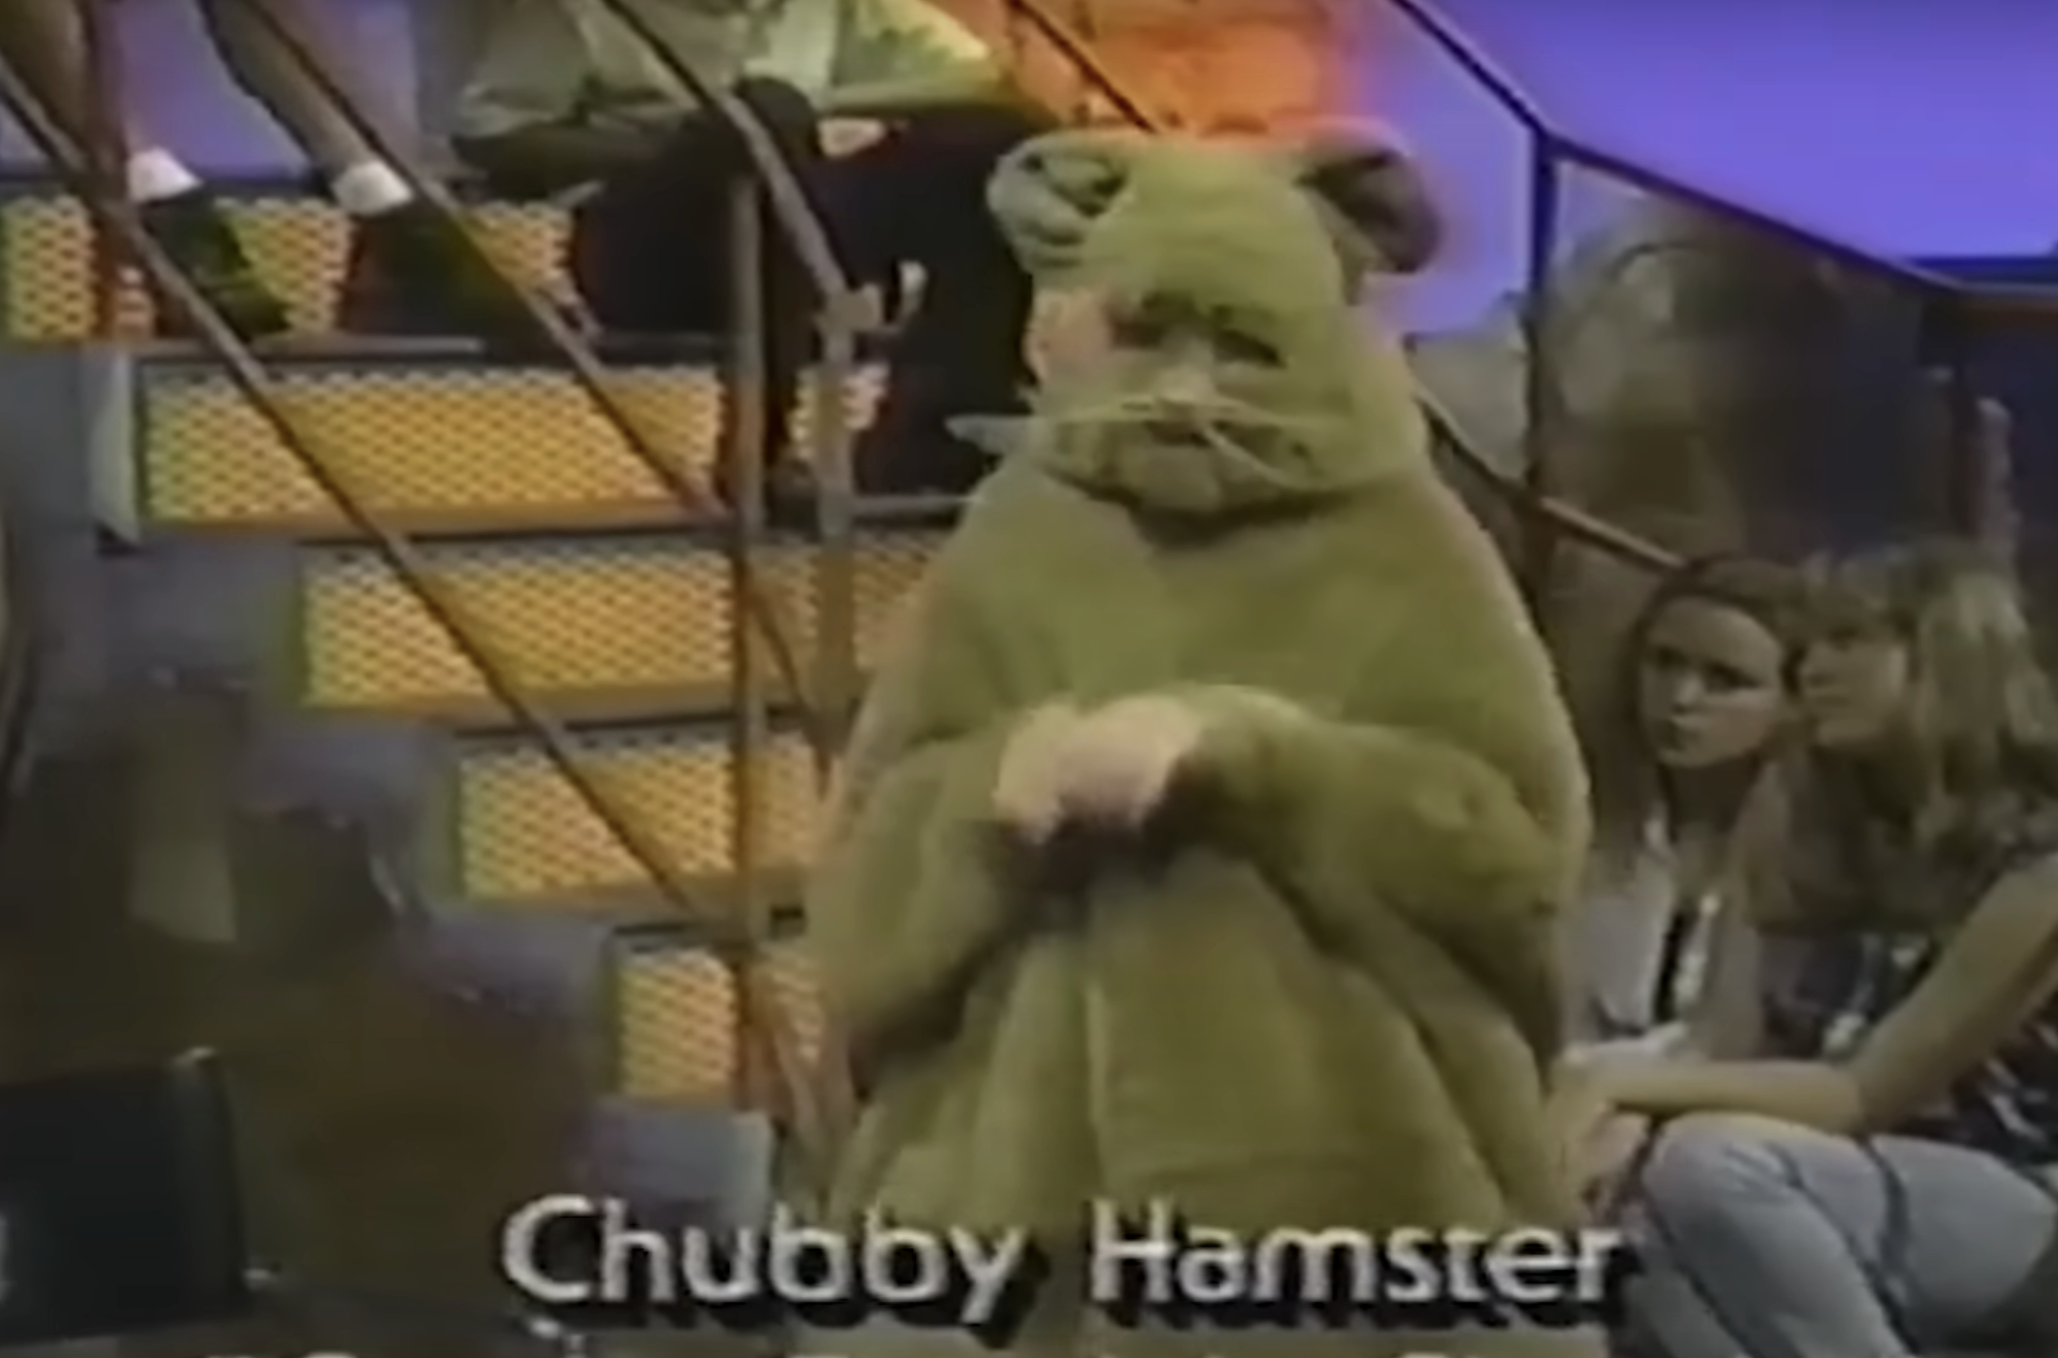 Ryan in a hamster costume on a TV show set with onlooking audience